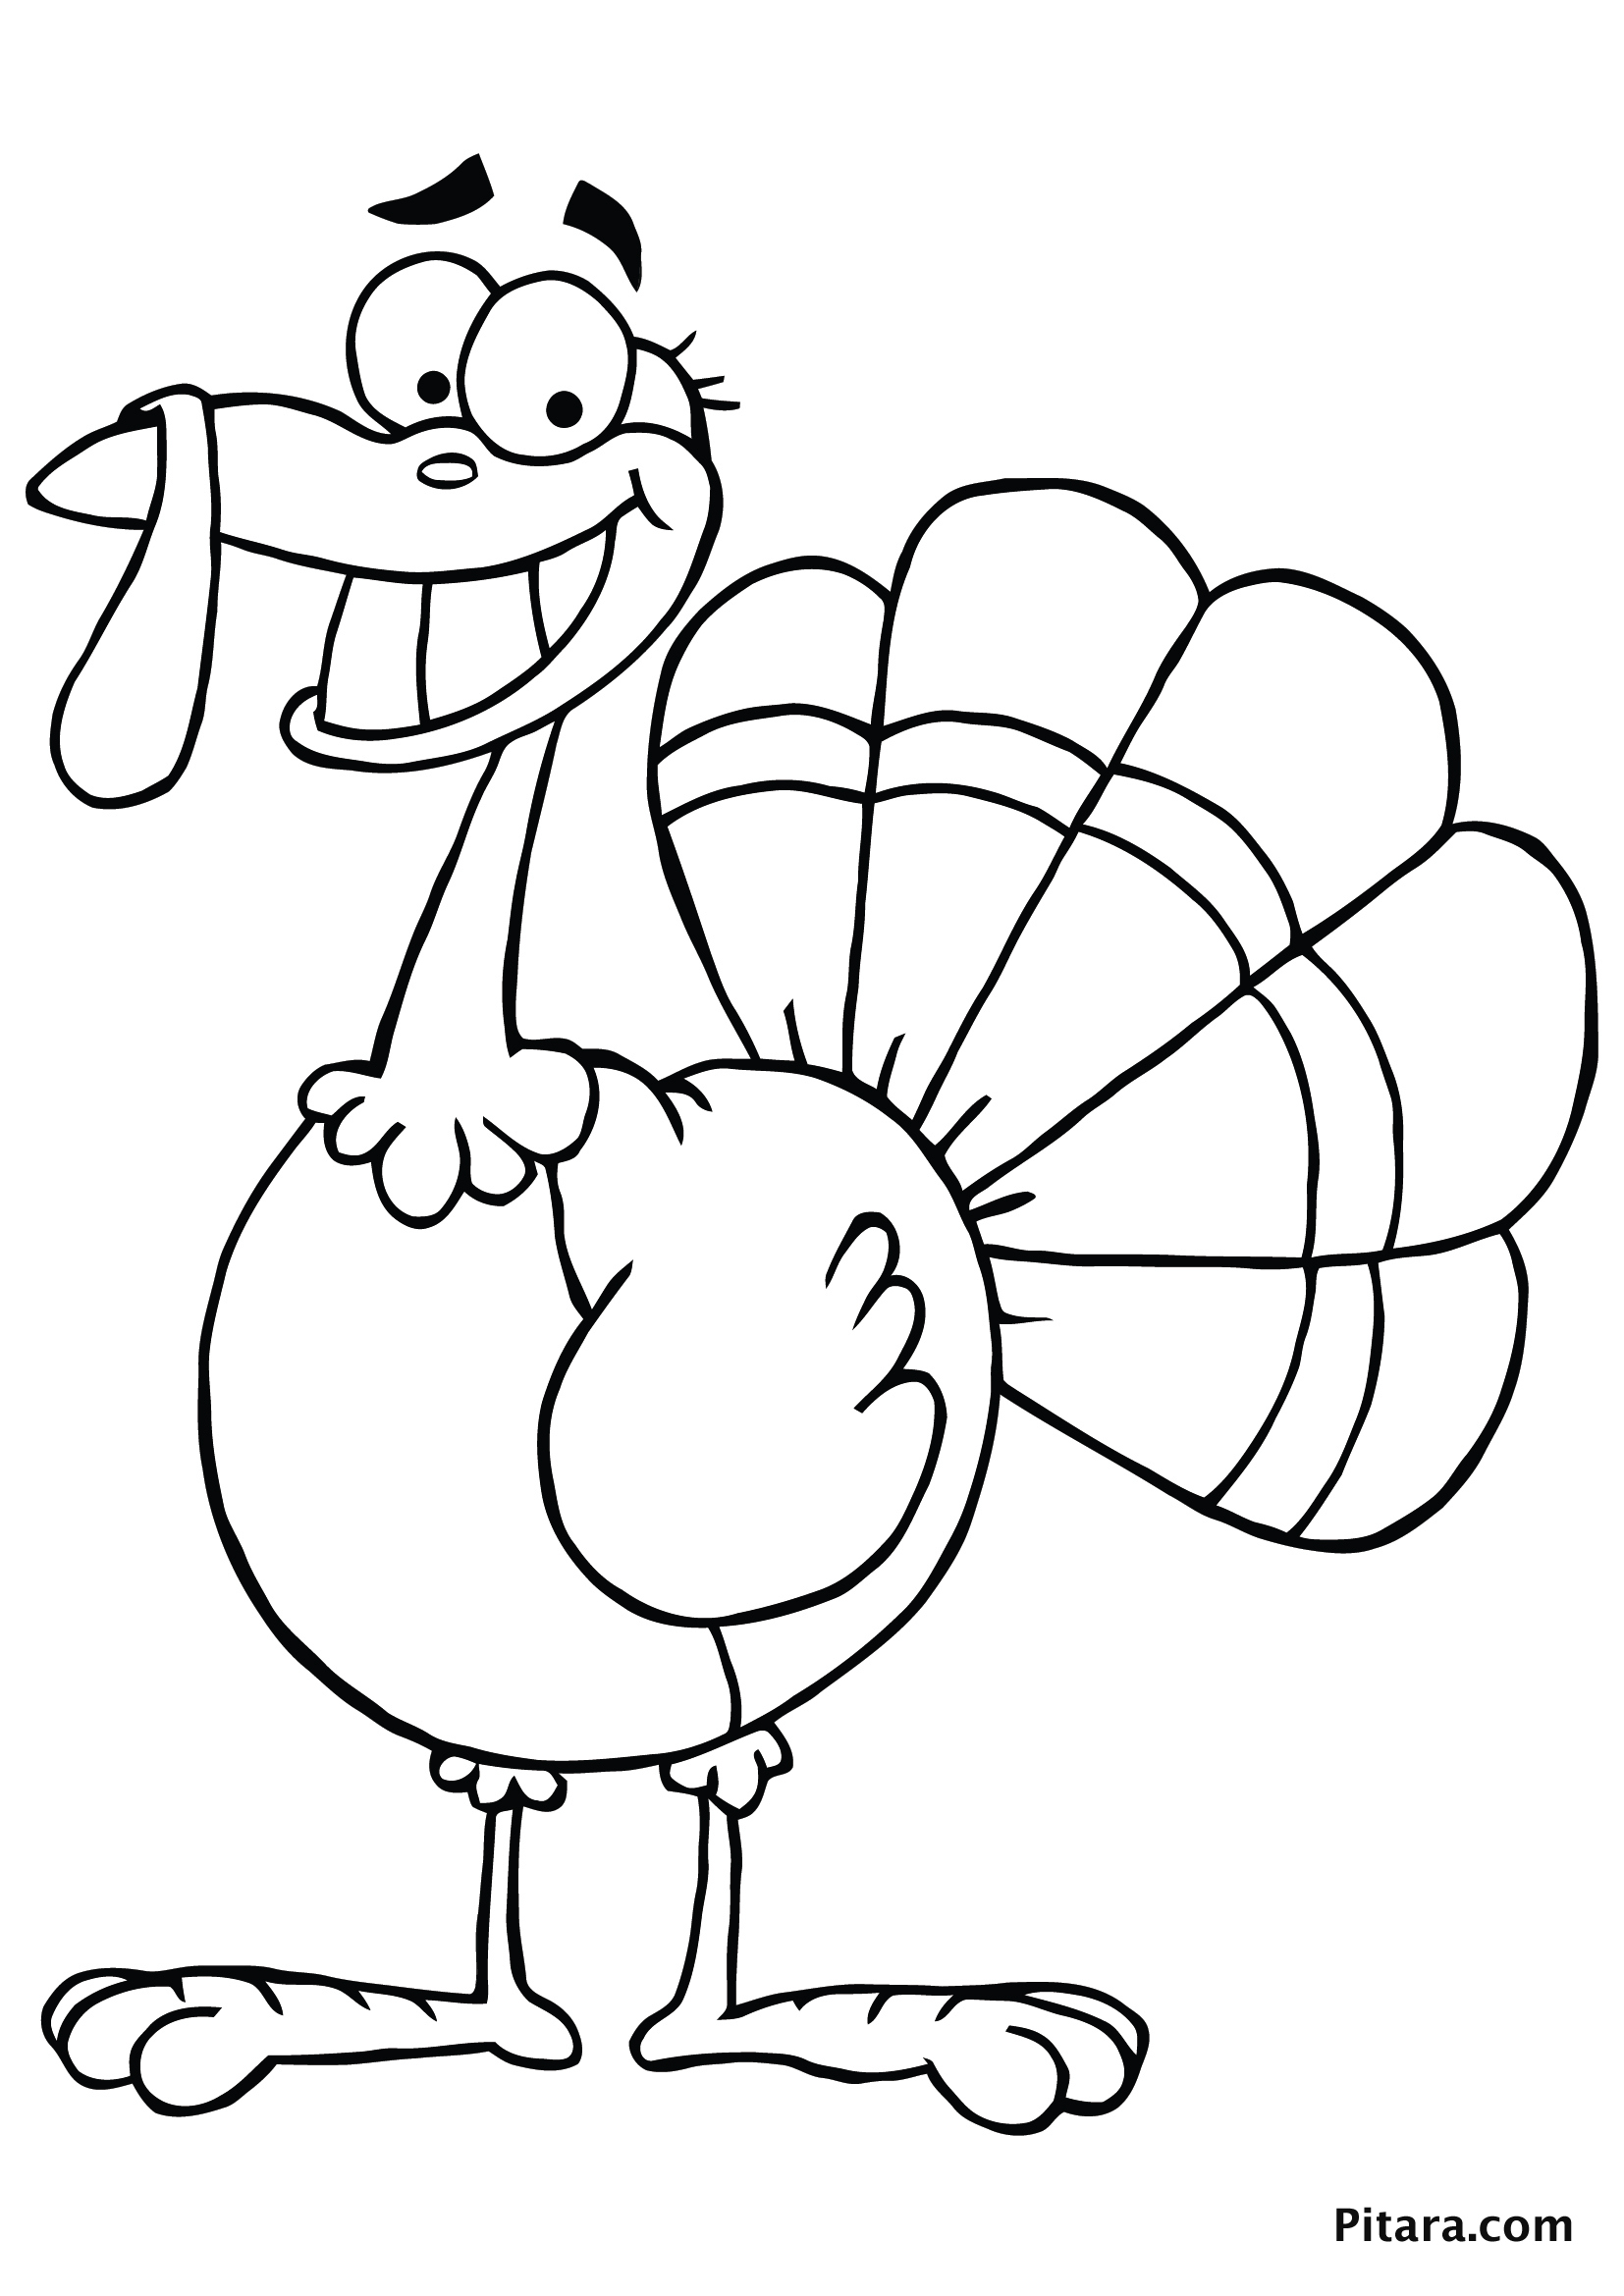 Turkey Hunting Coloring Pages at GetColoringscom Free